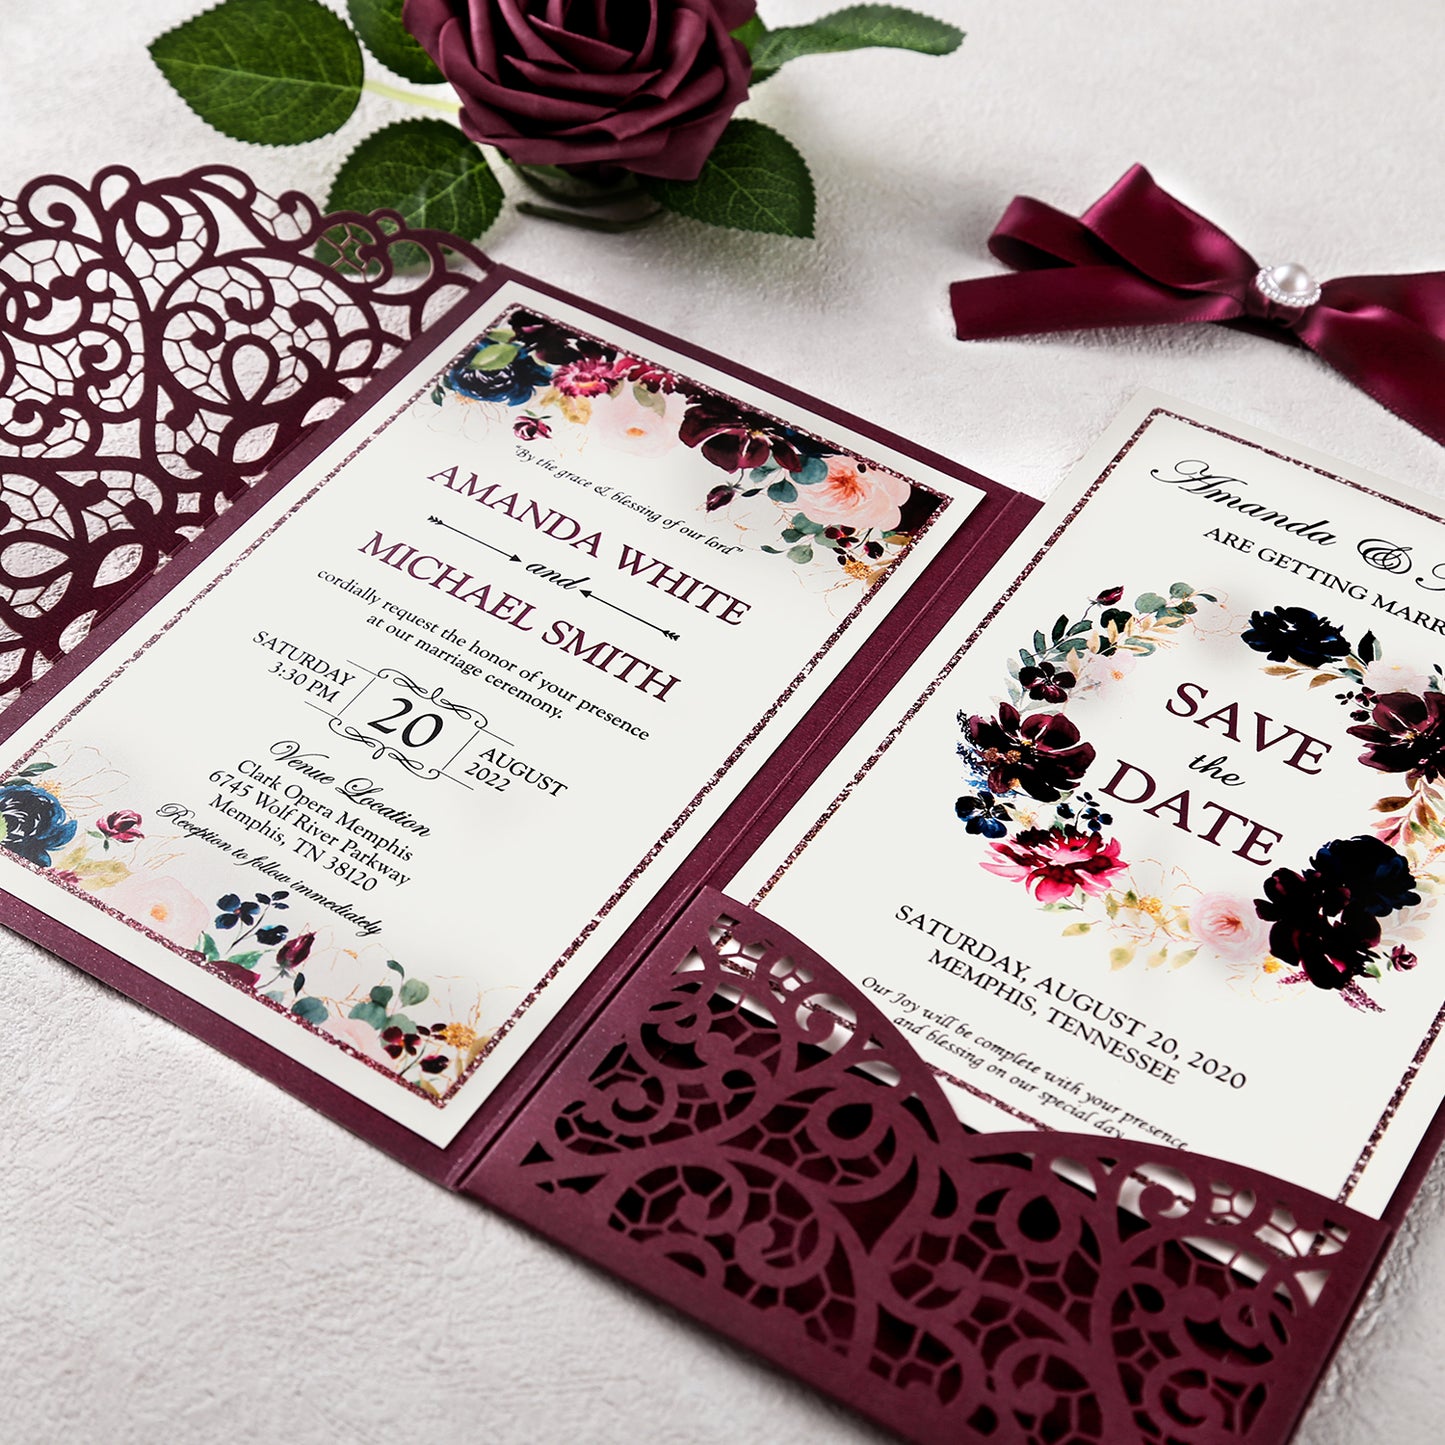 4.7 x7 inch Burgundy Laser Cut Hollow Rose Wedding Invitations Cards with Envelopes for Wedding Party